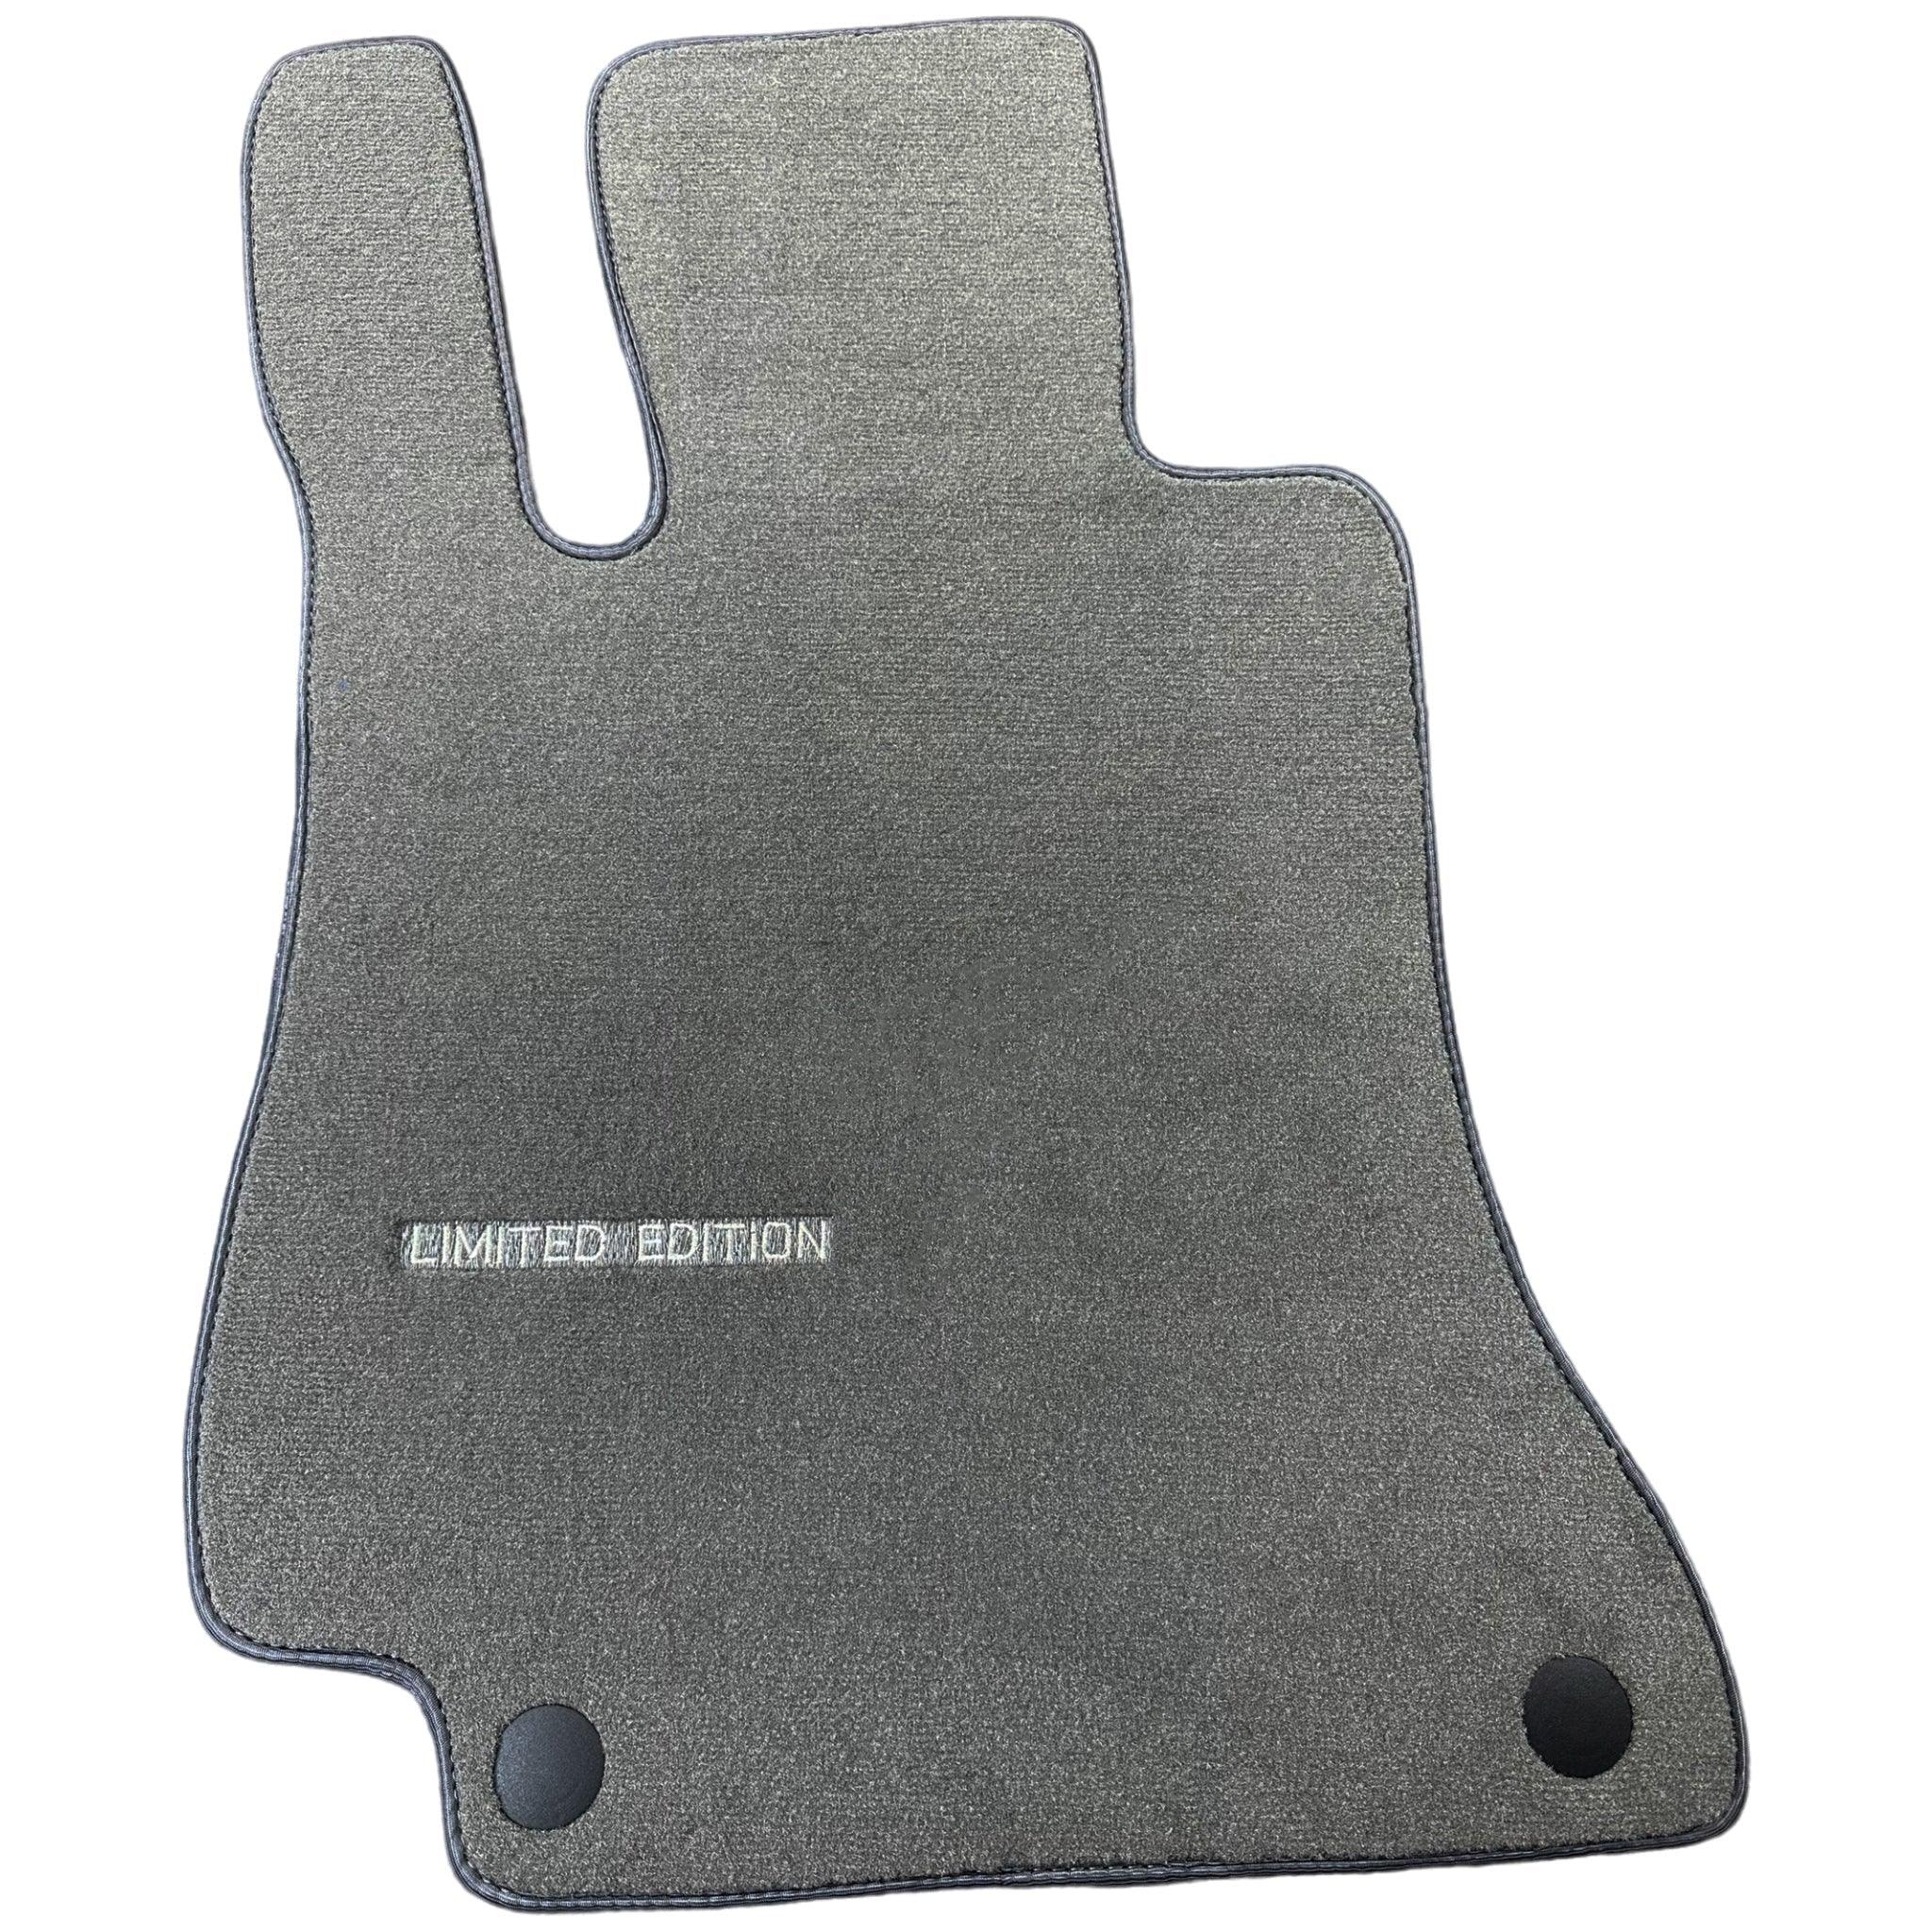 Gray Floor Mats For Mercedes Benz E-Class C207 Coupe (2009-2013) | Limited Edition